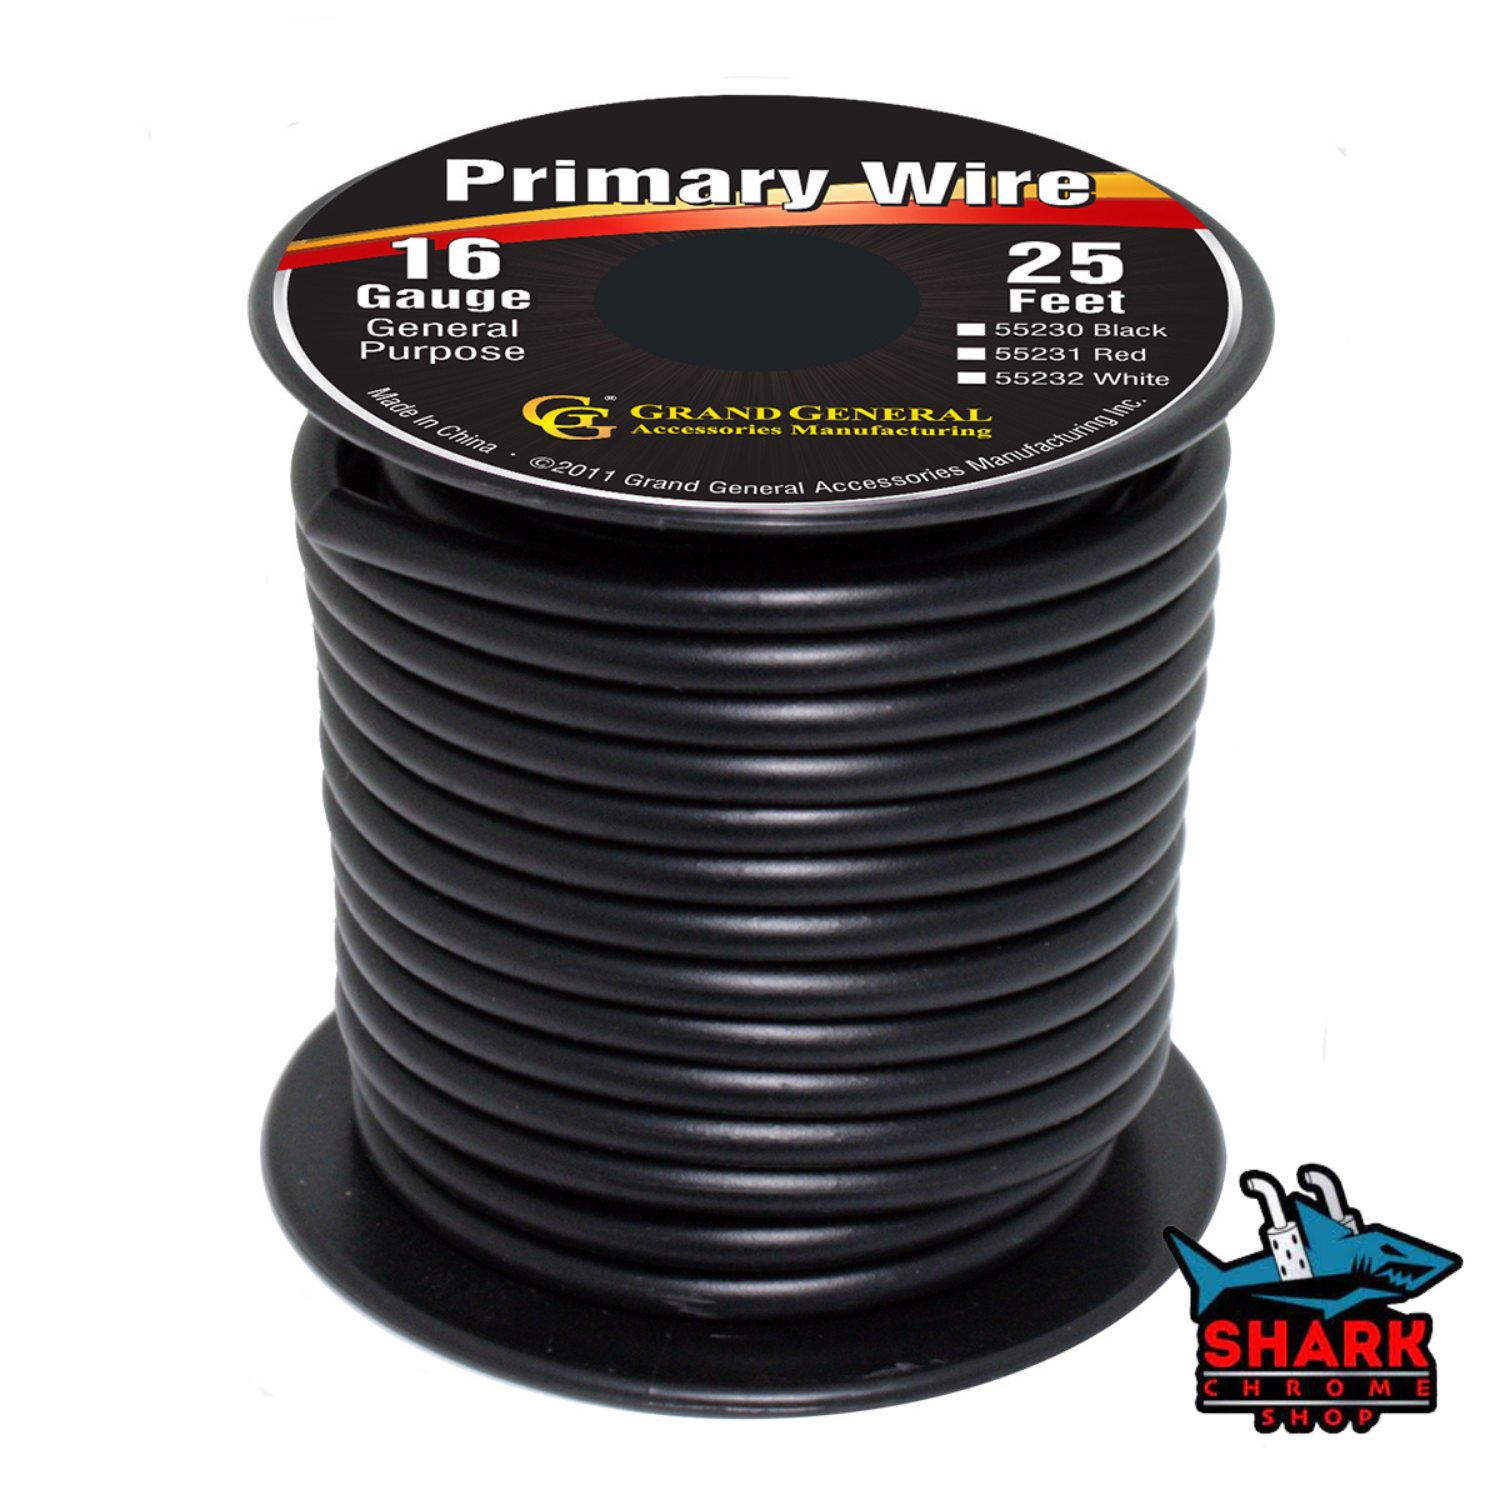 14 Gauge Primary AWG Wire 25' FT Each Red & Black Stranded Copper